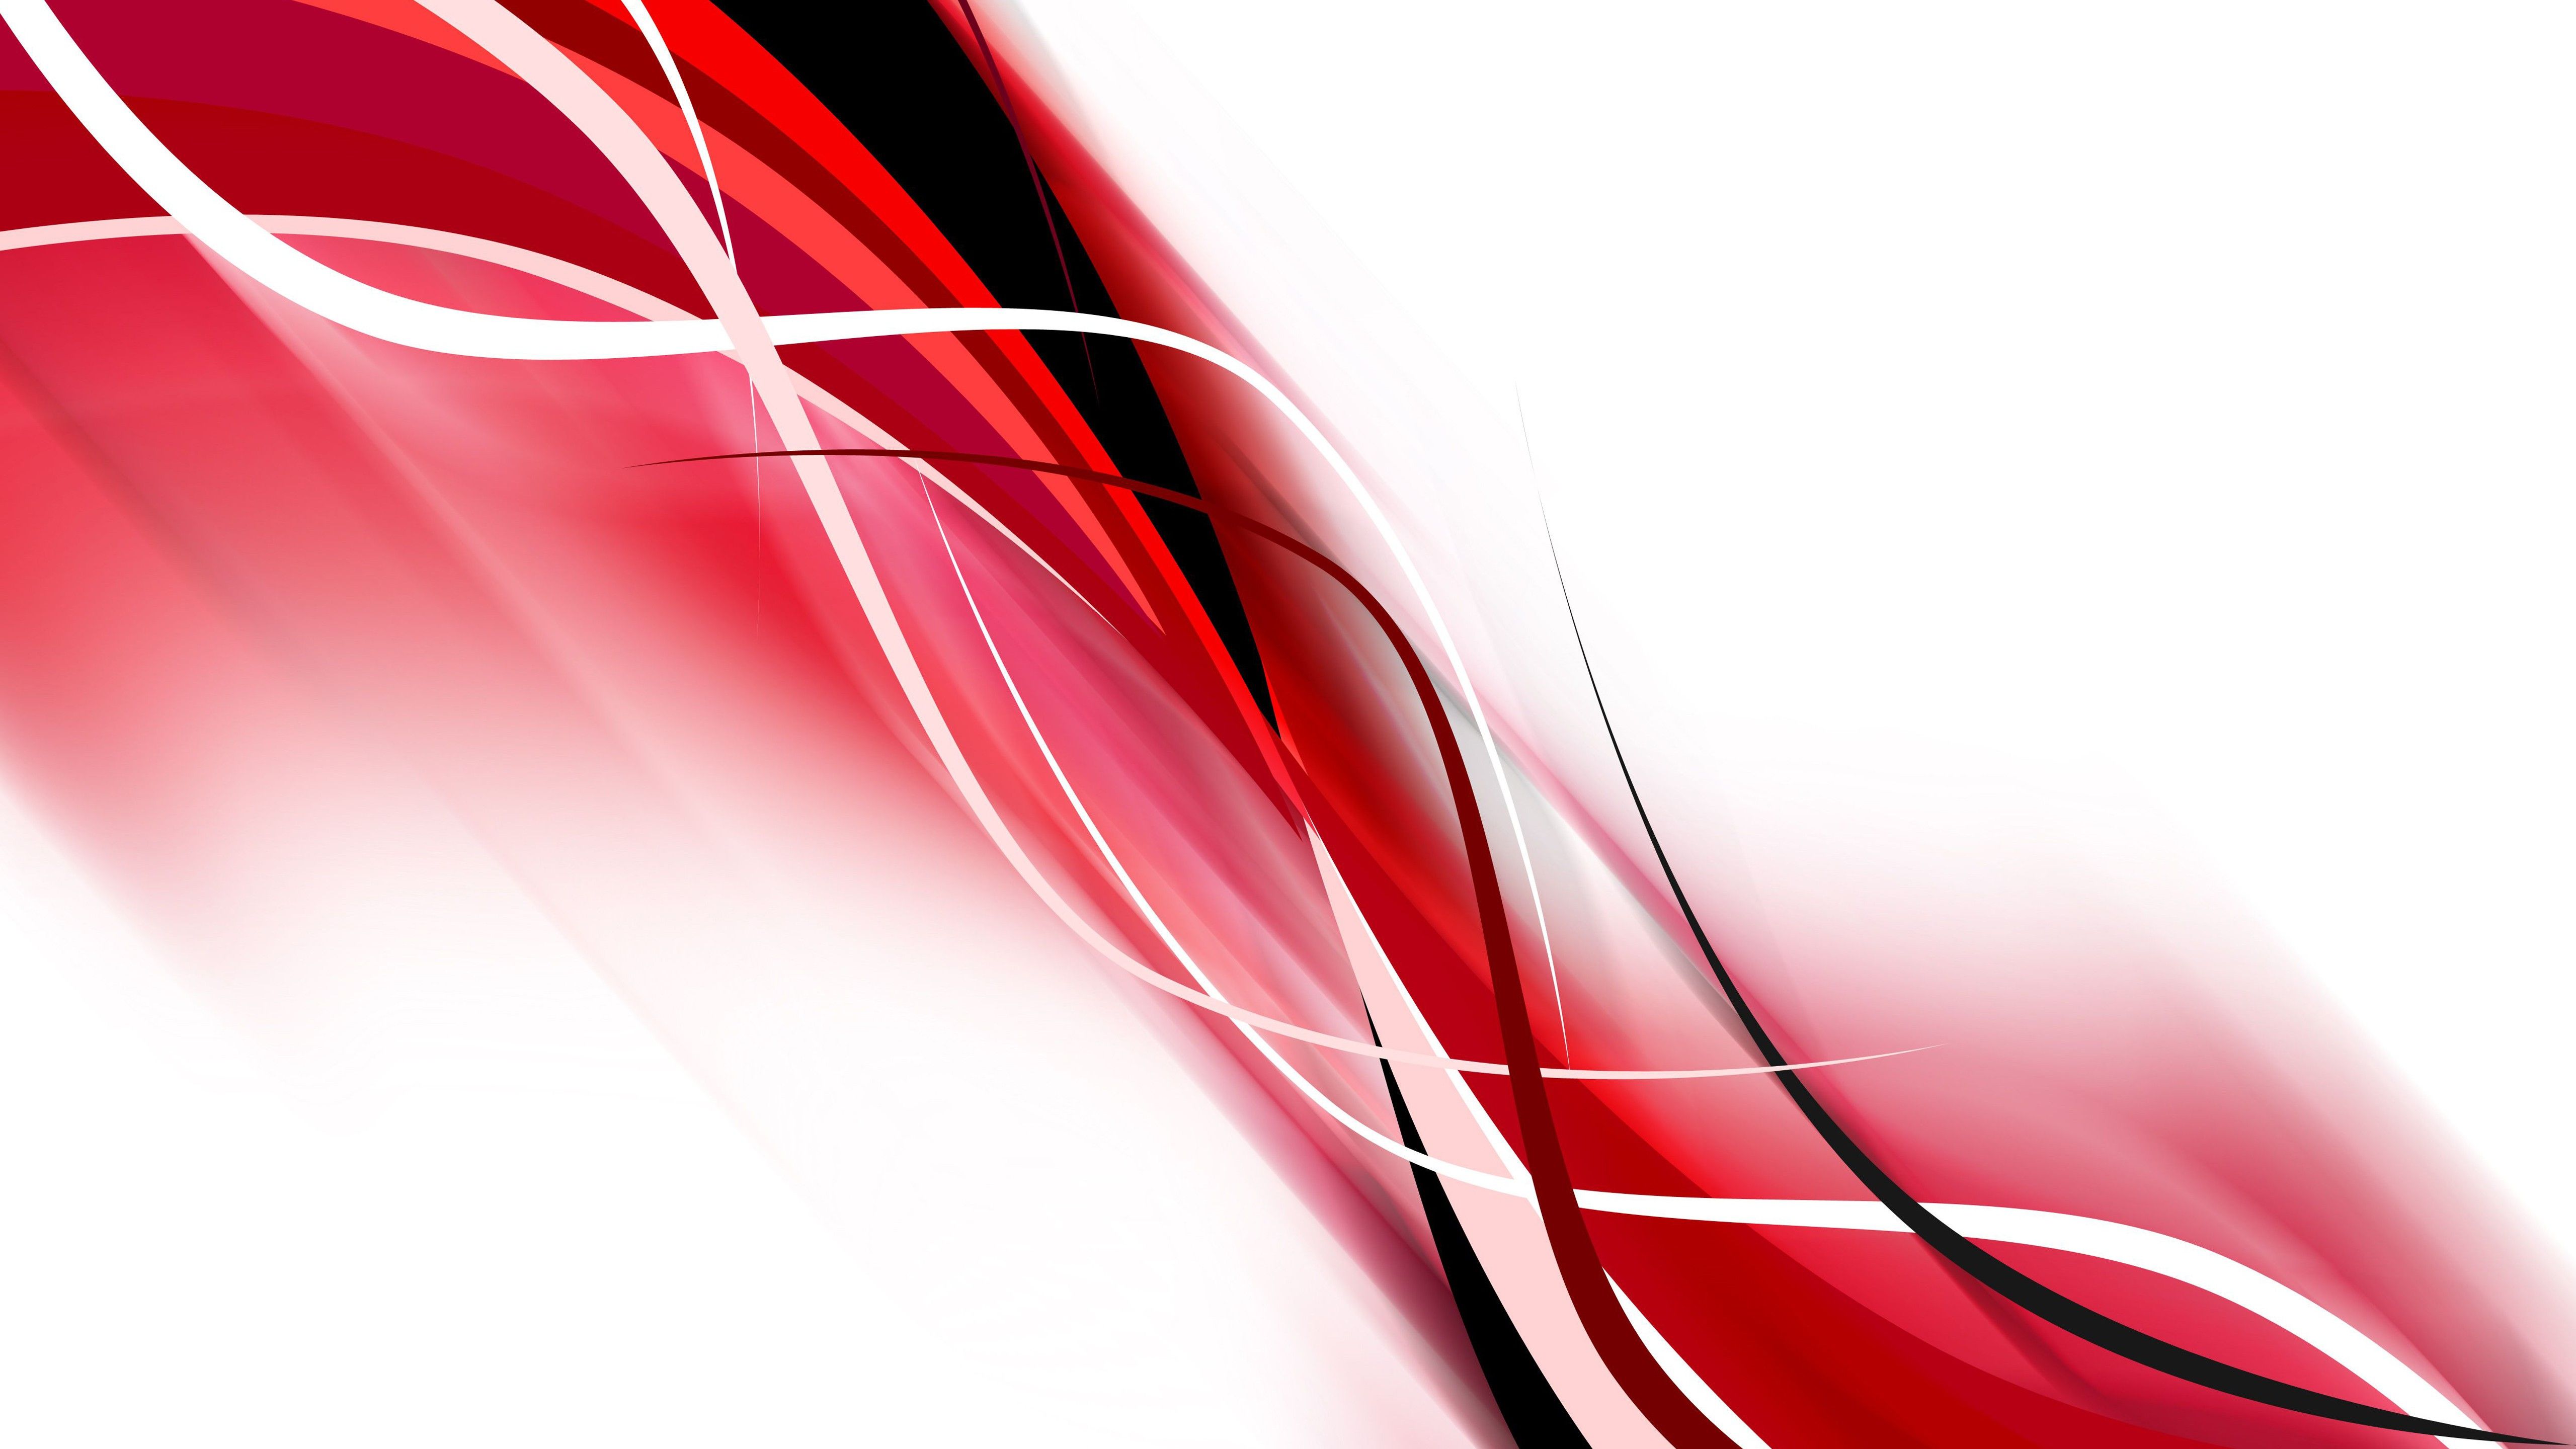 Waves Of Red White And Black 4K 5K HD Red Aesthetic Wallpaper